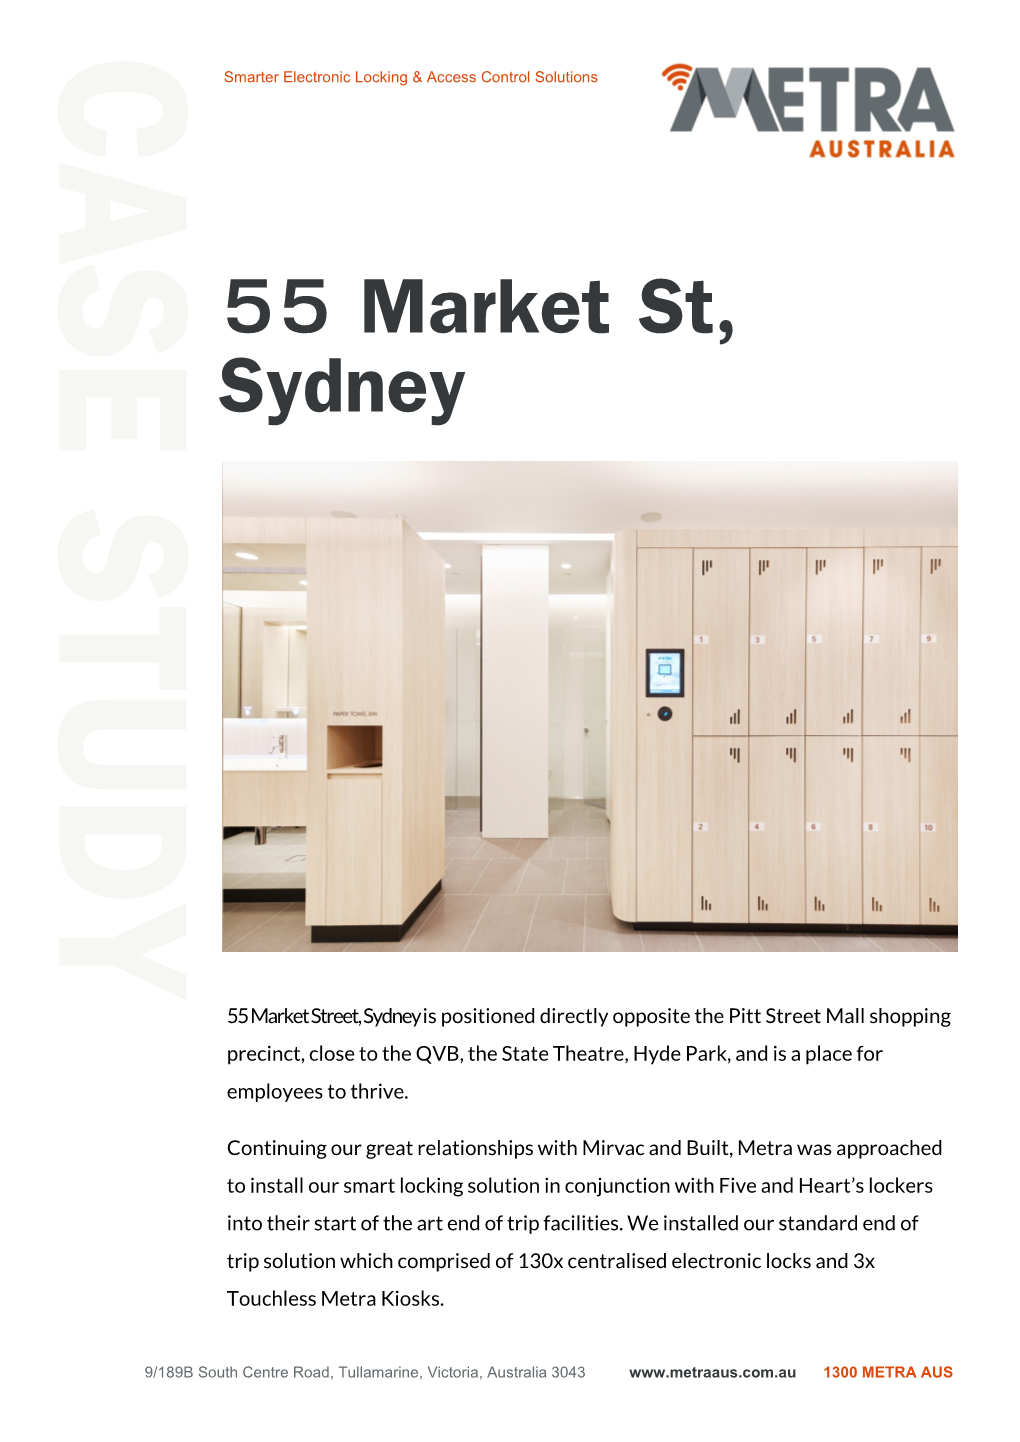 55 Market Street, Sydney Is Positioned Directly Opposite the Pitt Street Mall